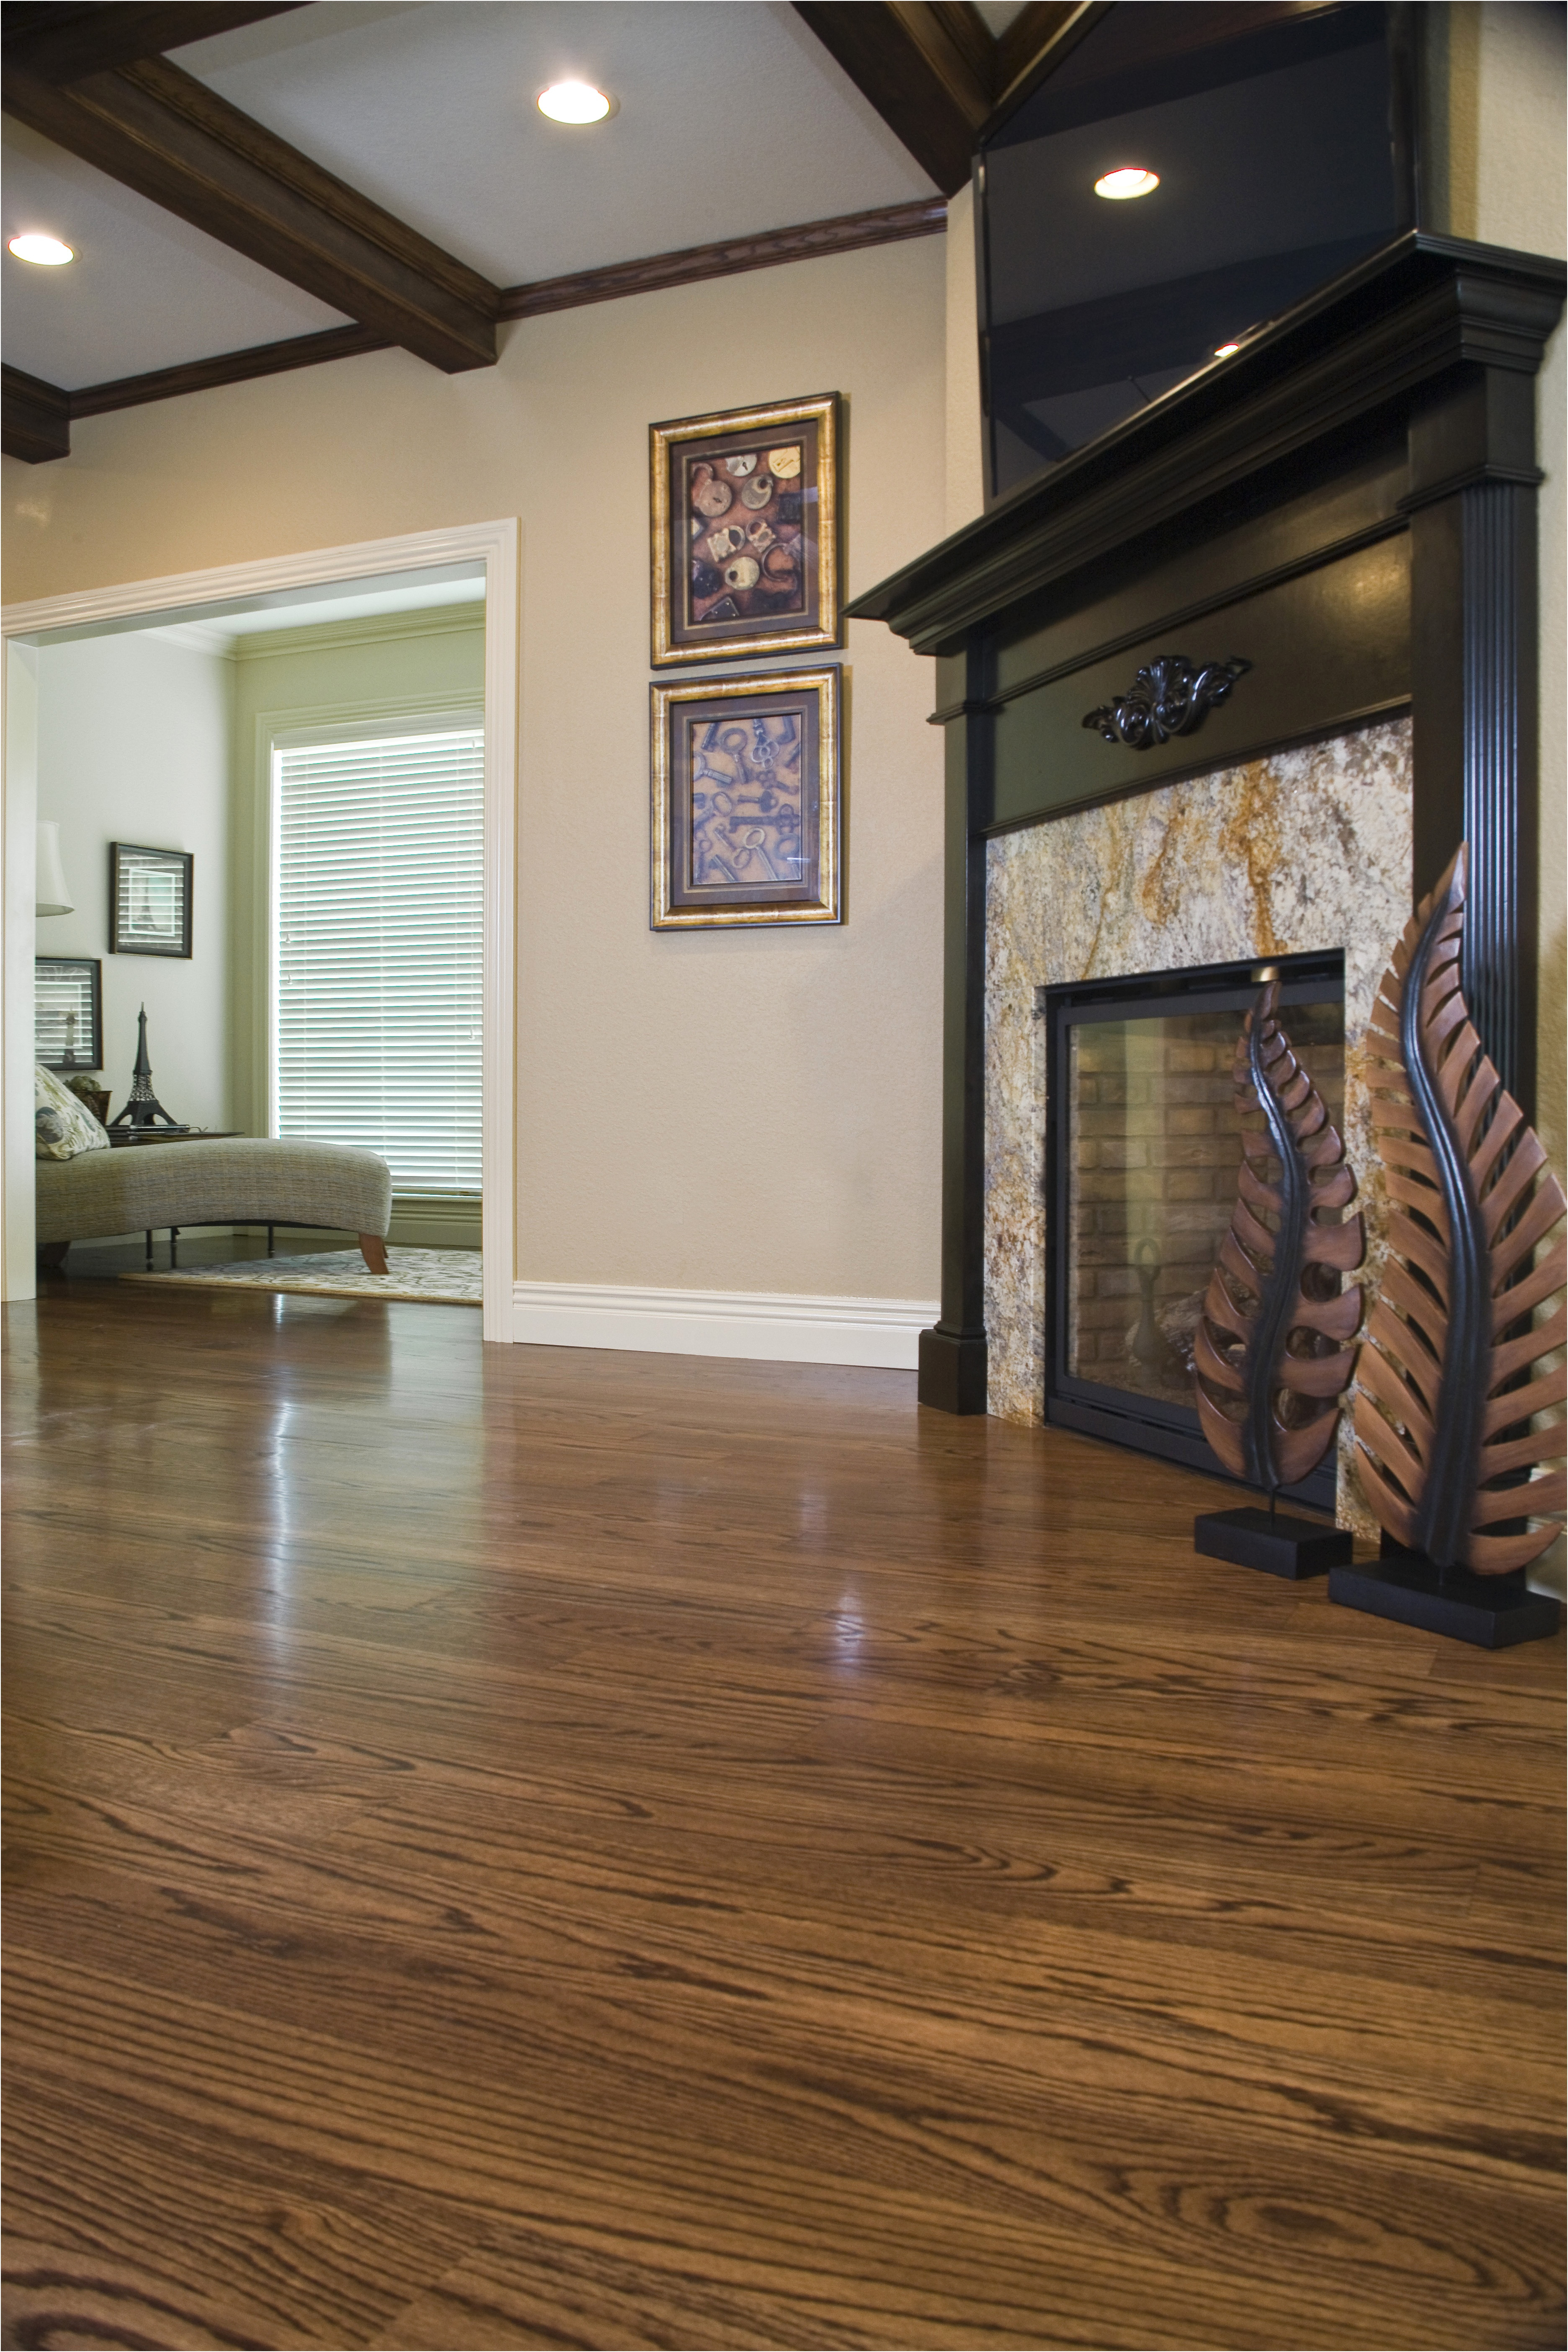 unfinished hardwood flooring ottawa of unfinished red oak flooring lowes fresh floor hardwood flooring cost in related post